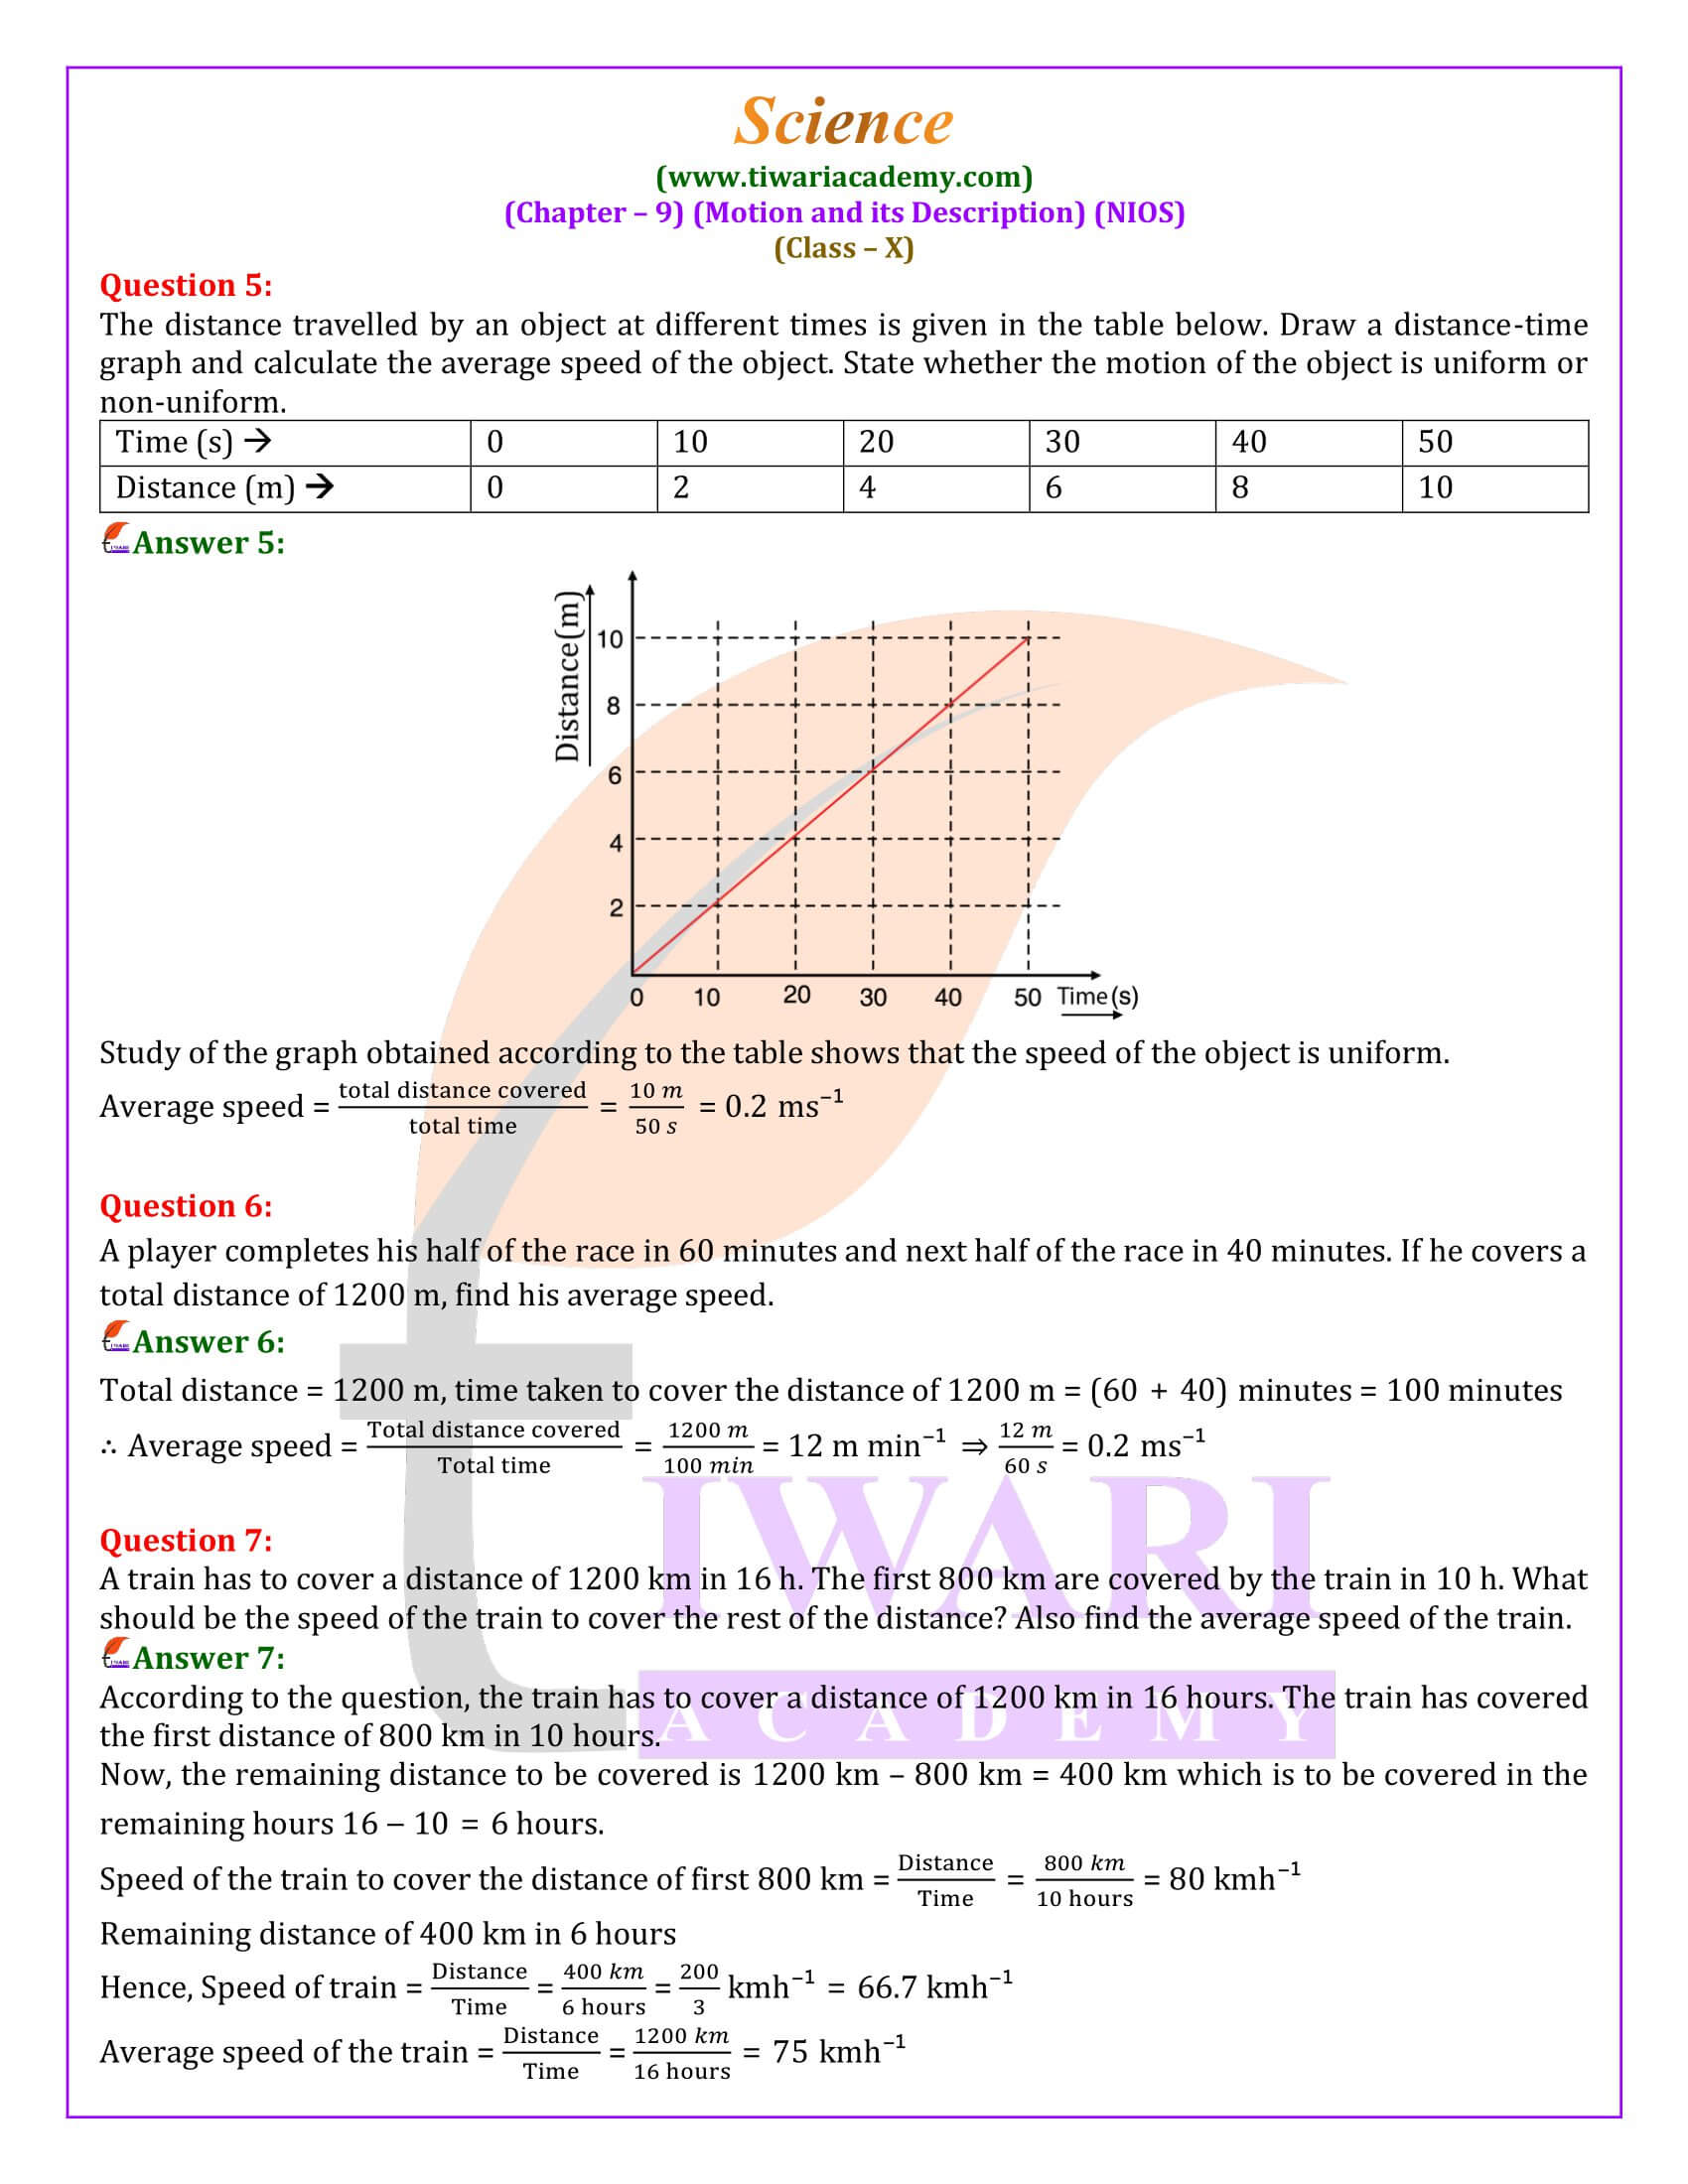 NIOS Class 10 Science Chapter 9 Motion and its Description in English and Hindi Medium